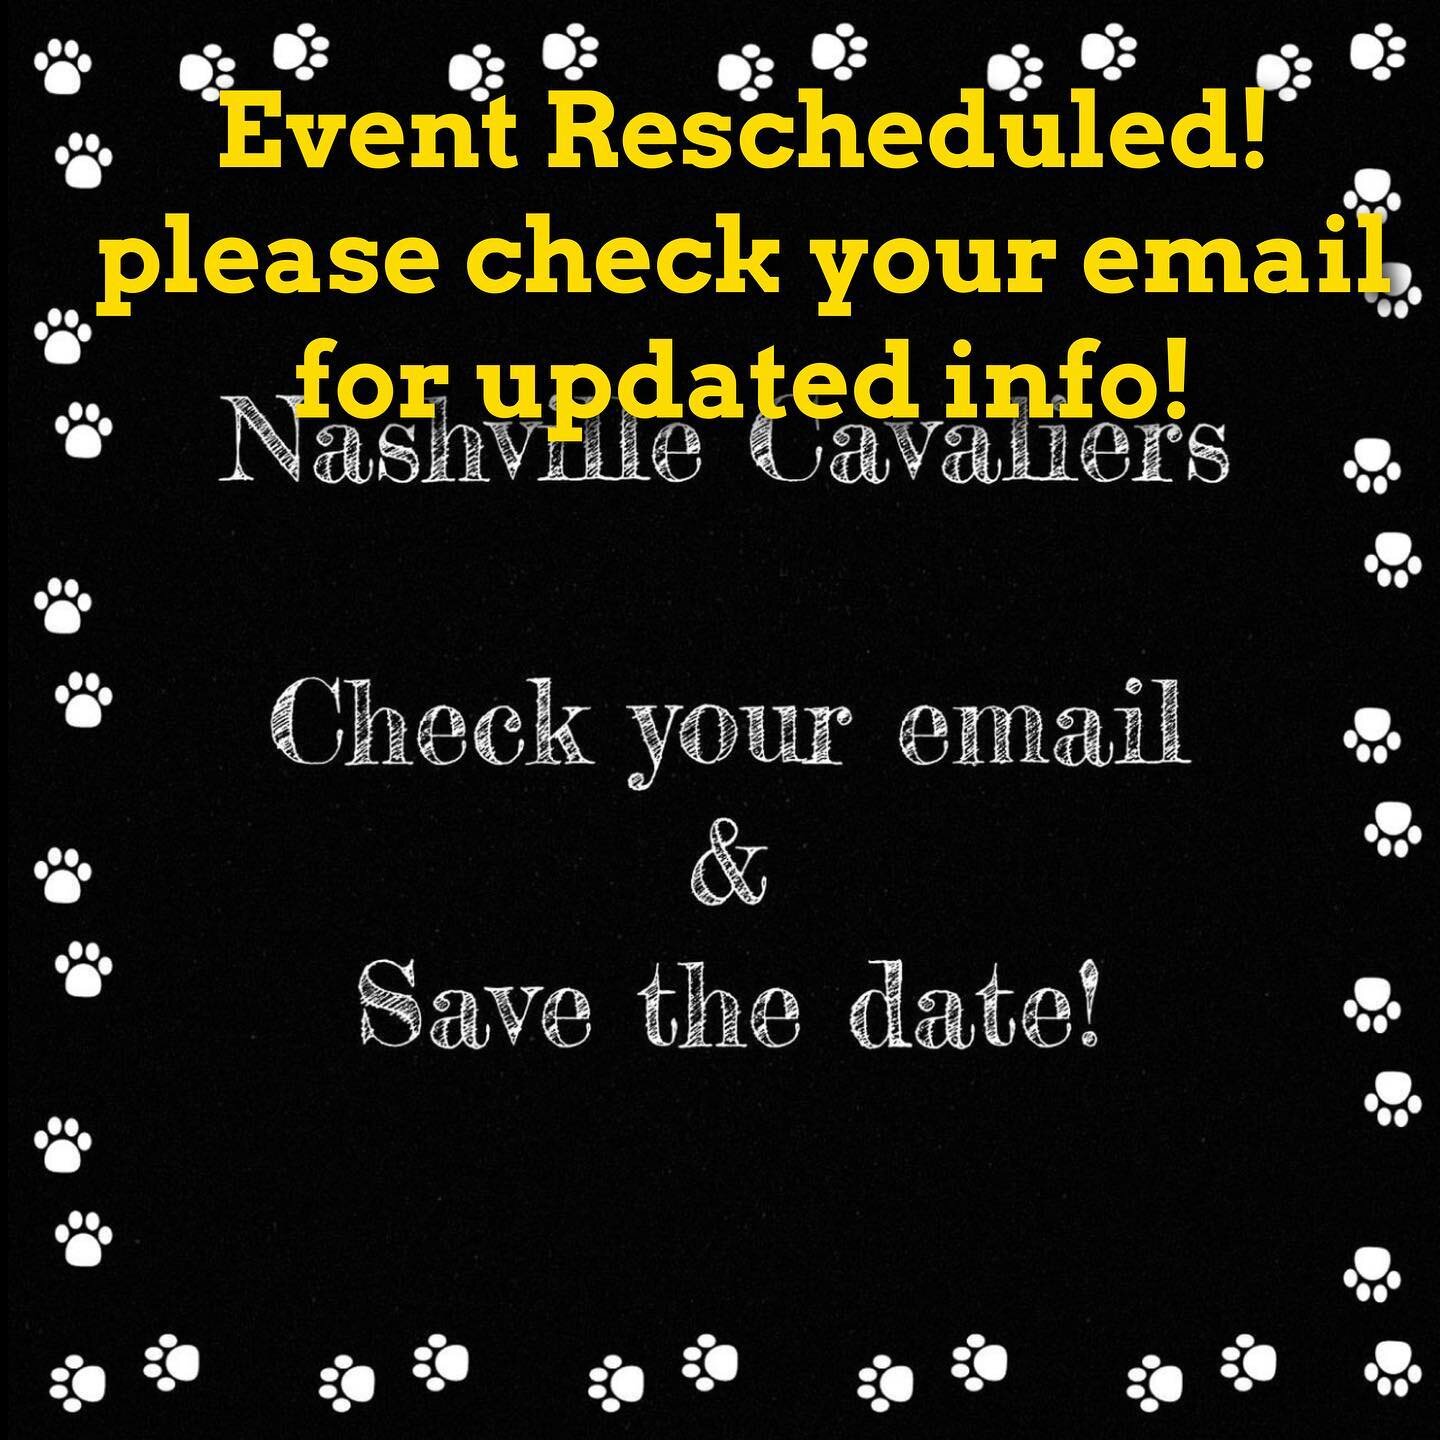 URGENT - Event has been rescheduled! Please check your email for the new date and ticket link. 
🎉🎉🎉 Save the date - 5/20/23! 🎉🎉🎉 It&rsquo;s been way too long since we&rsquo;ve all been together! Check your email for our announcement of our 1st 